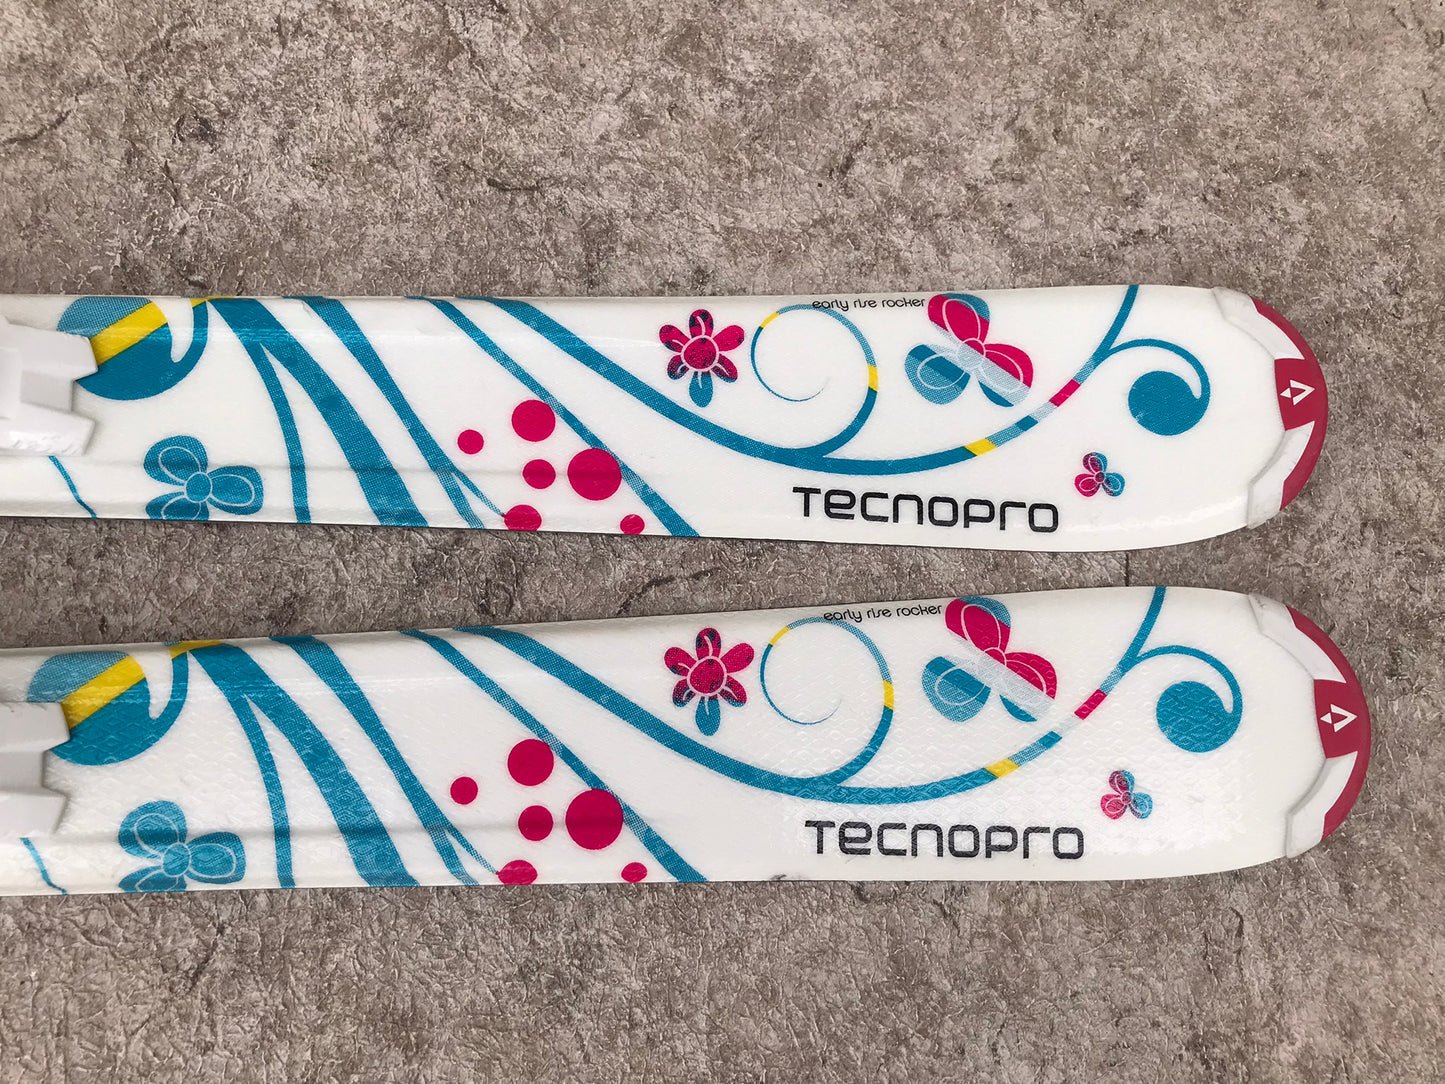 Ski 120 Techo Pro Sweety Parabolic White Teal Pink With Bindings Excellent No